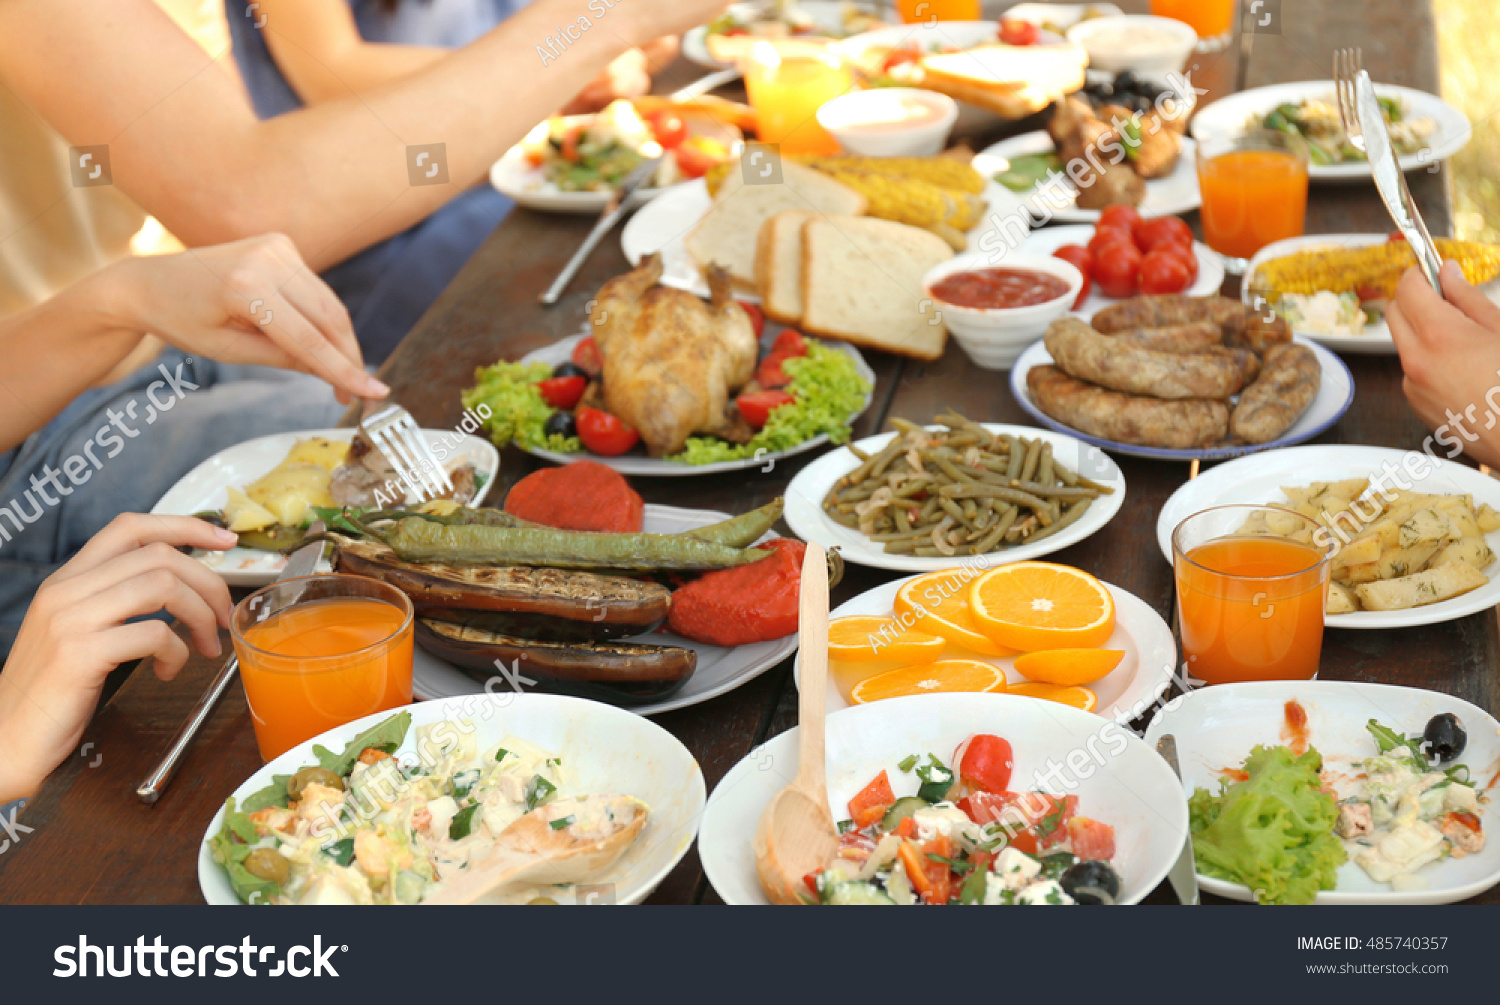 Friends Eating On Picnic Stock Photo 485740357 : Shutterstock